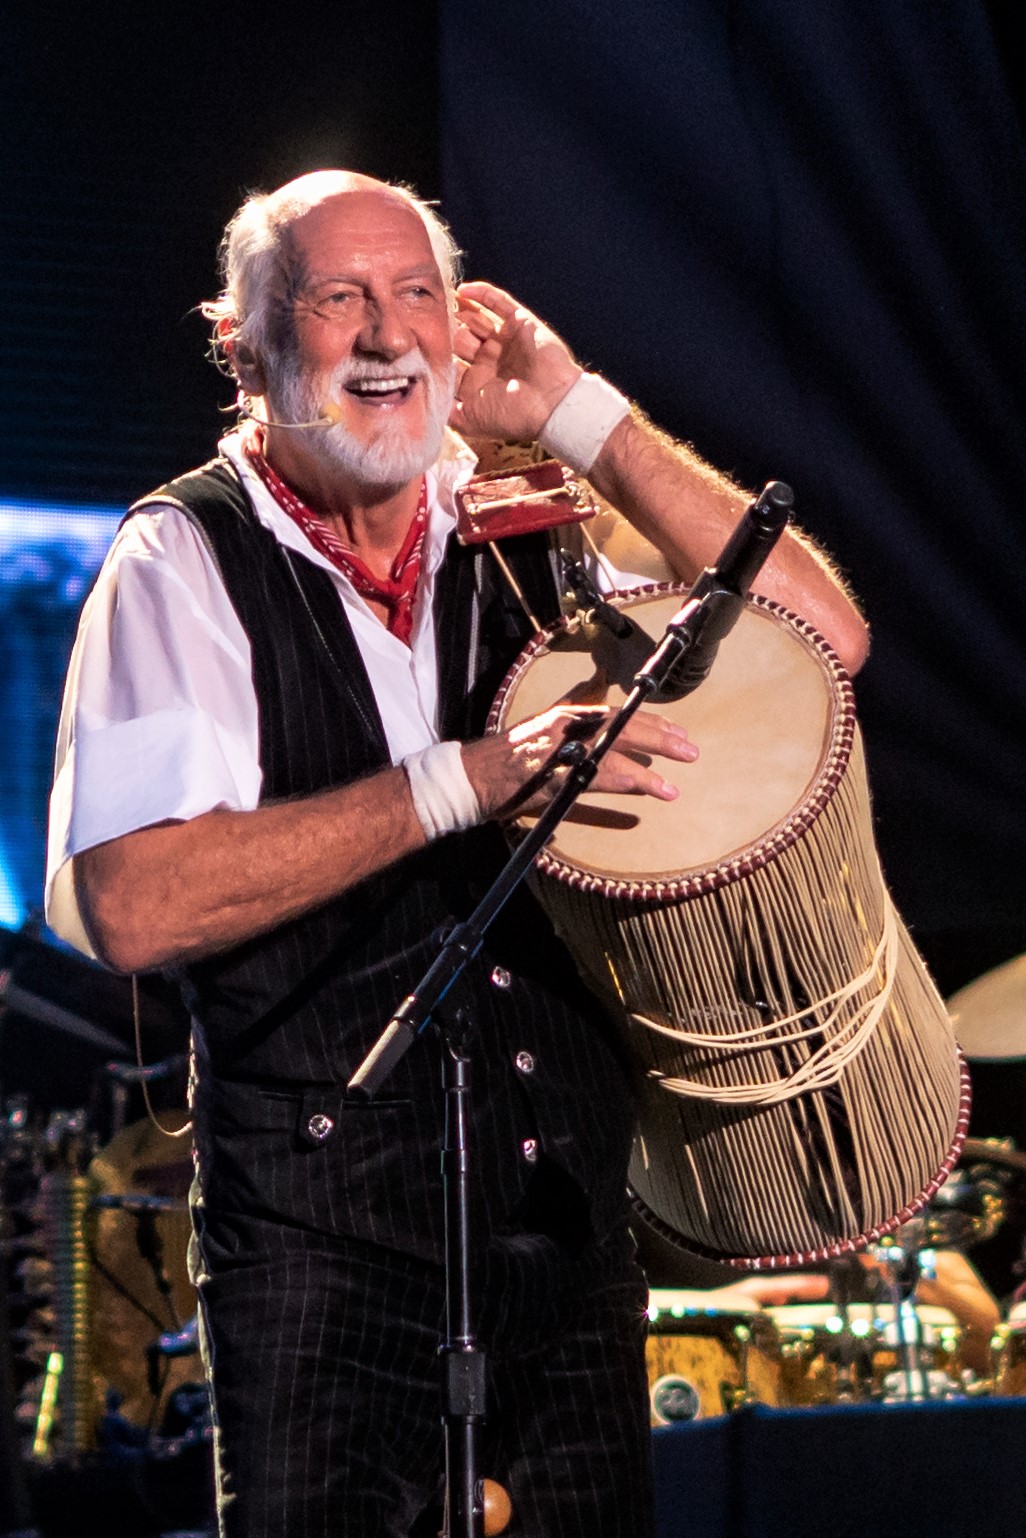   Happy Birthday Mr Mick Fleetwood 75 years young today the greatest drummer of all time. 